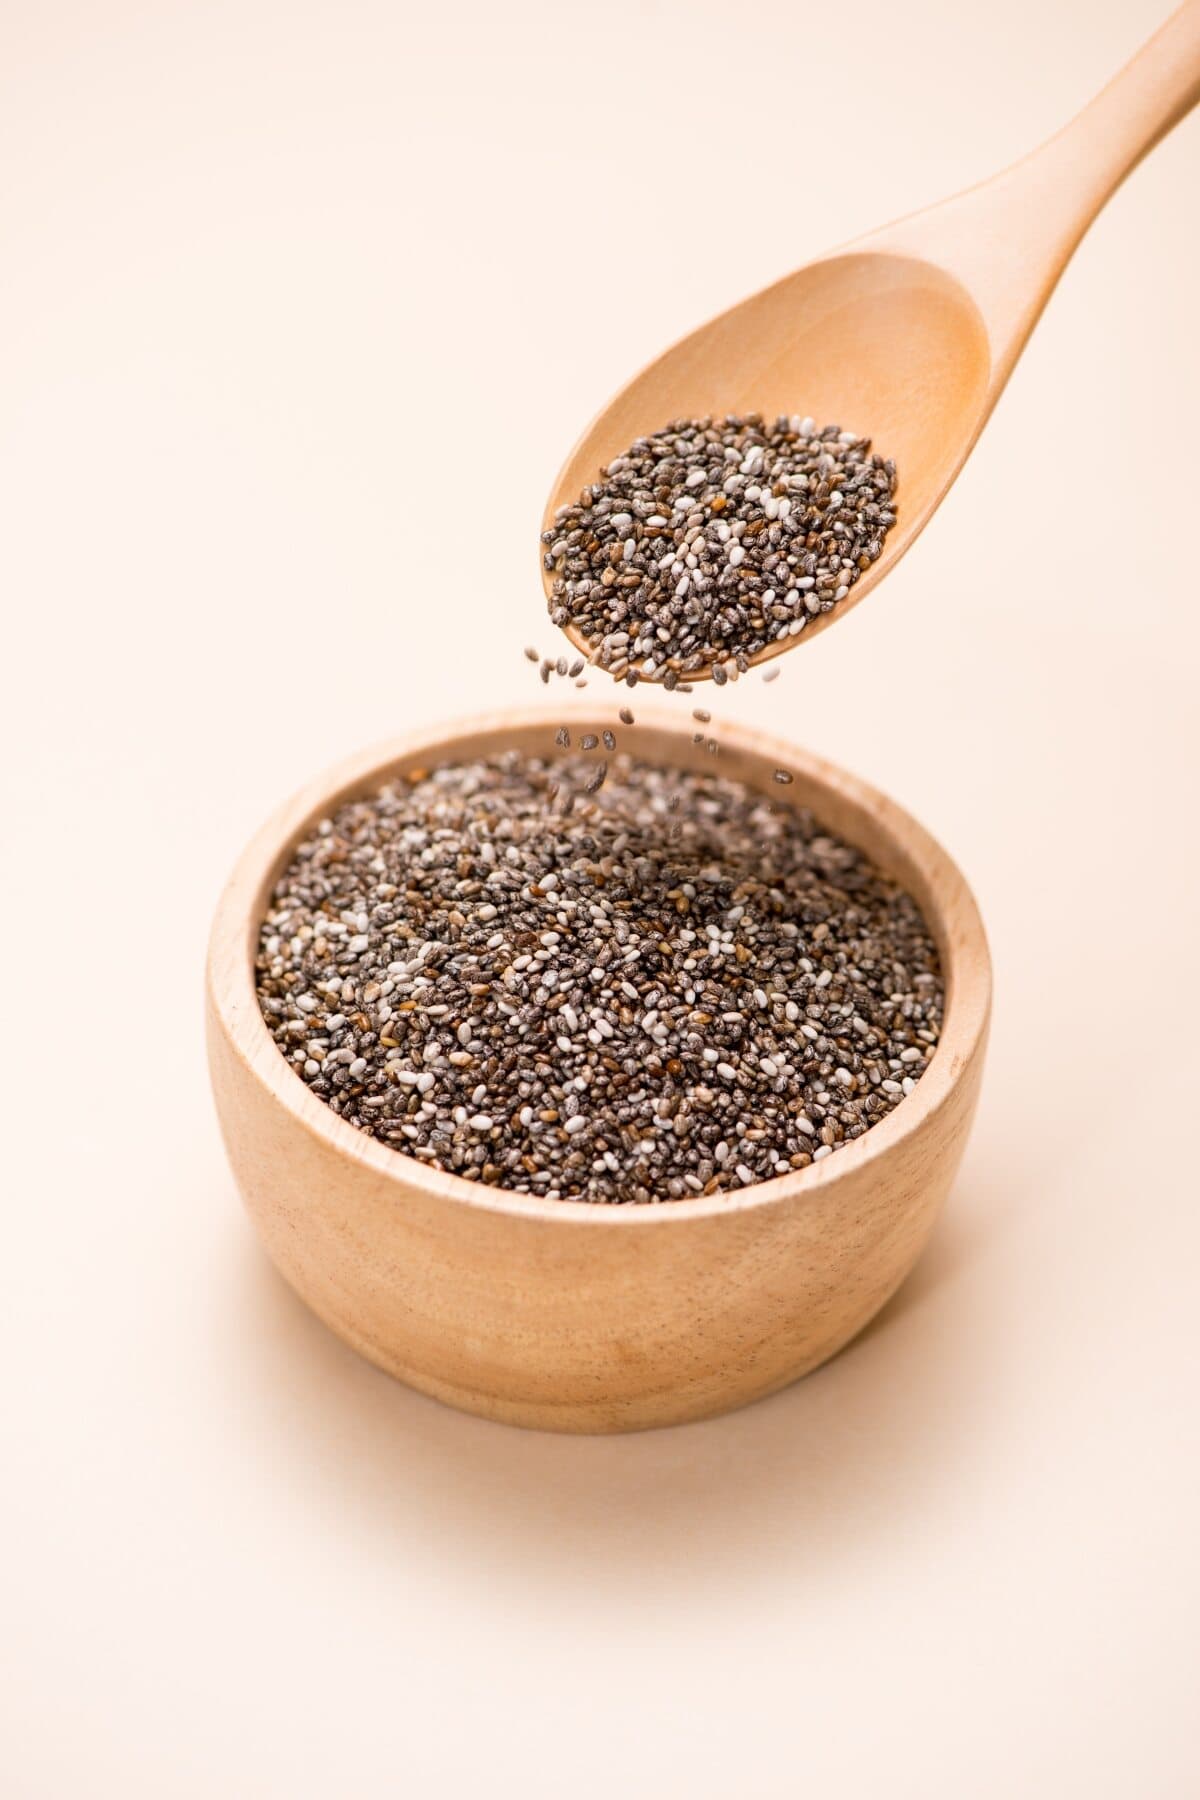 close-up of raw, unprocessed, dried black chia seeds